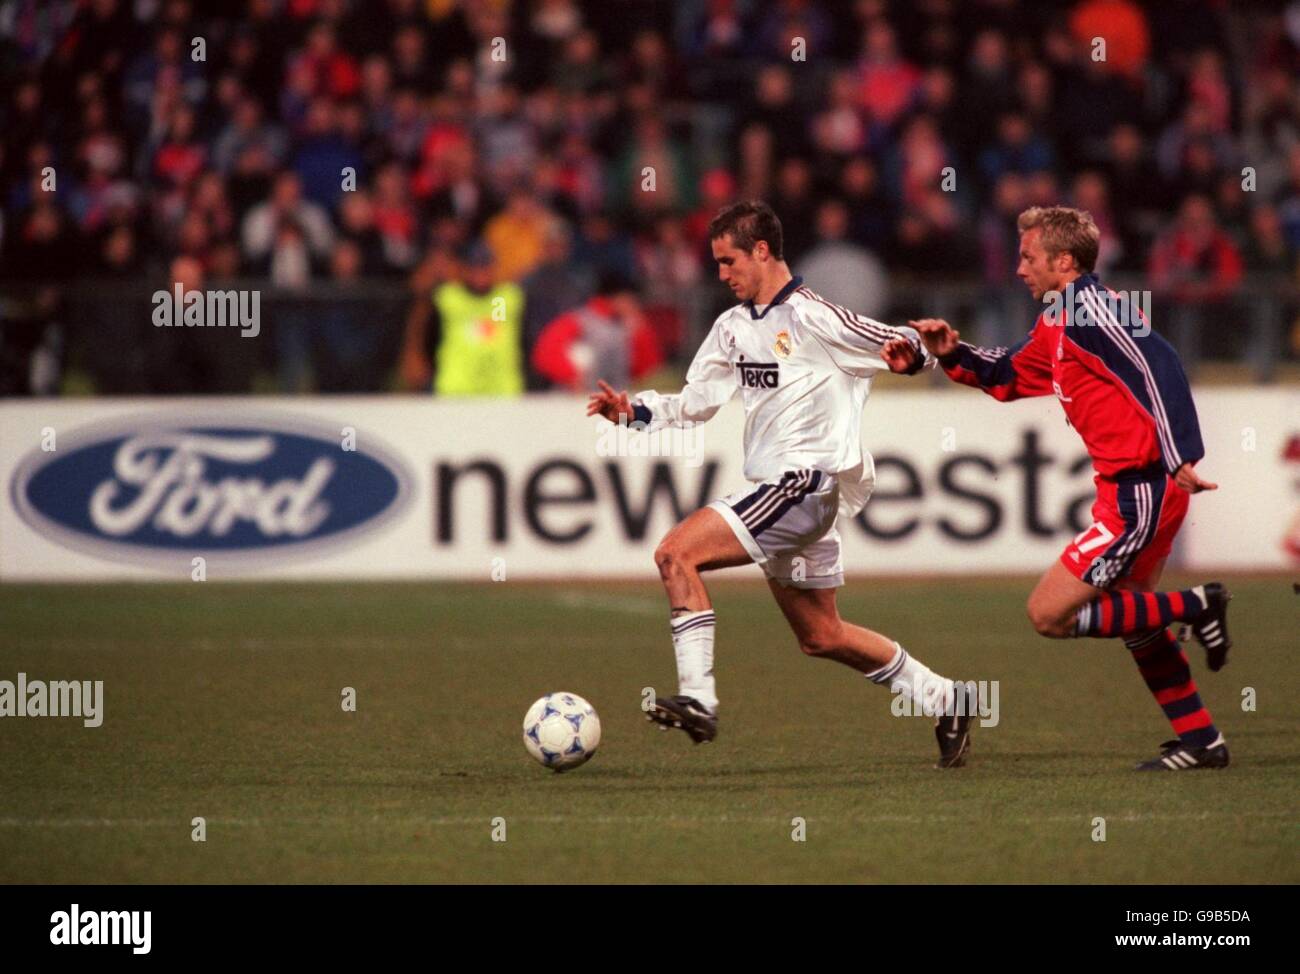 Soccer - UEFA Champions League - Group C - Bayern Munich v Real Madrid. Real Madrid's Helguera (l) is chased by Bayern Munich's Thorsten Fink (r) Stock Photo